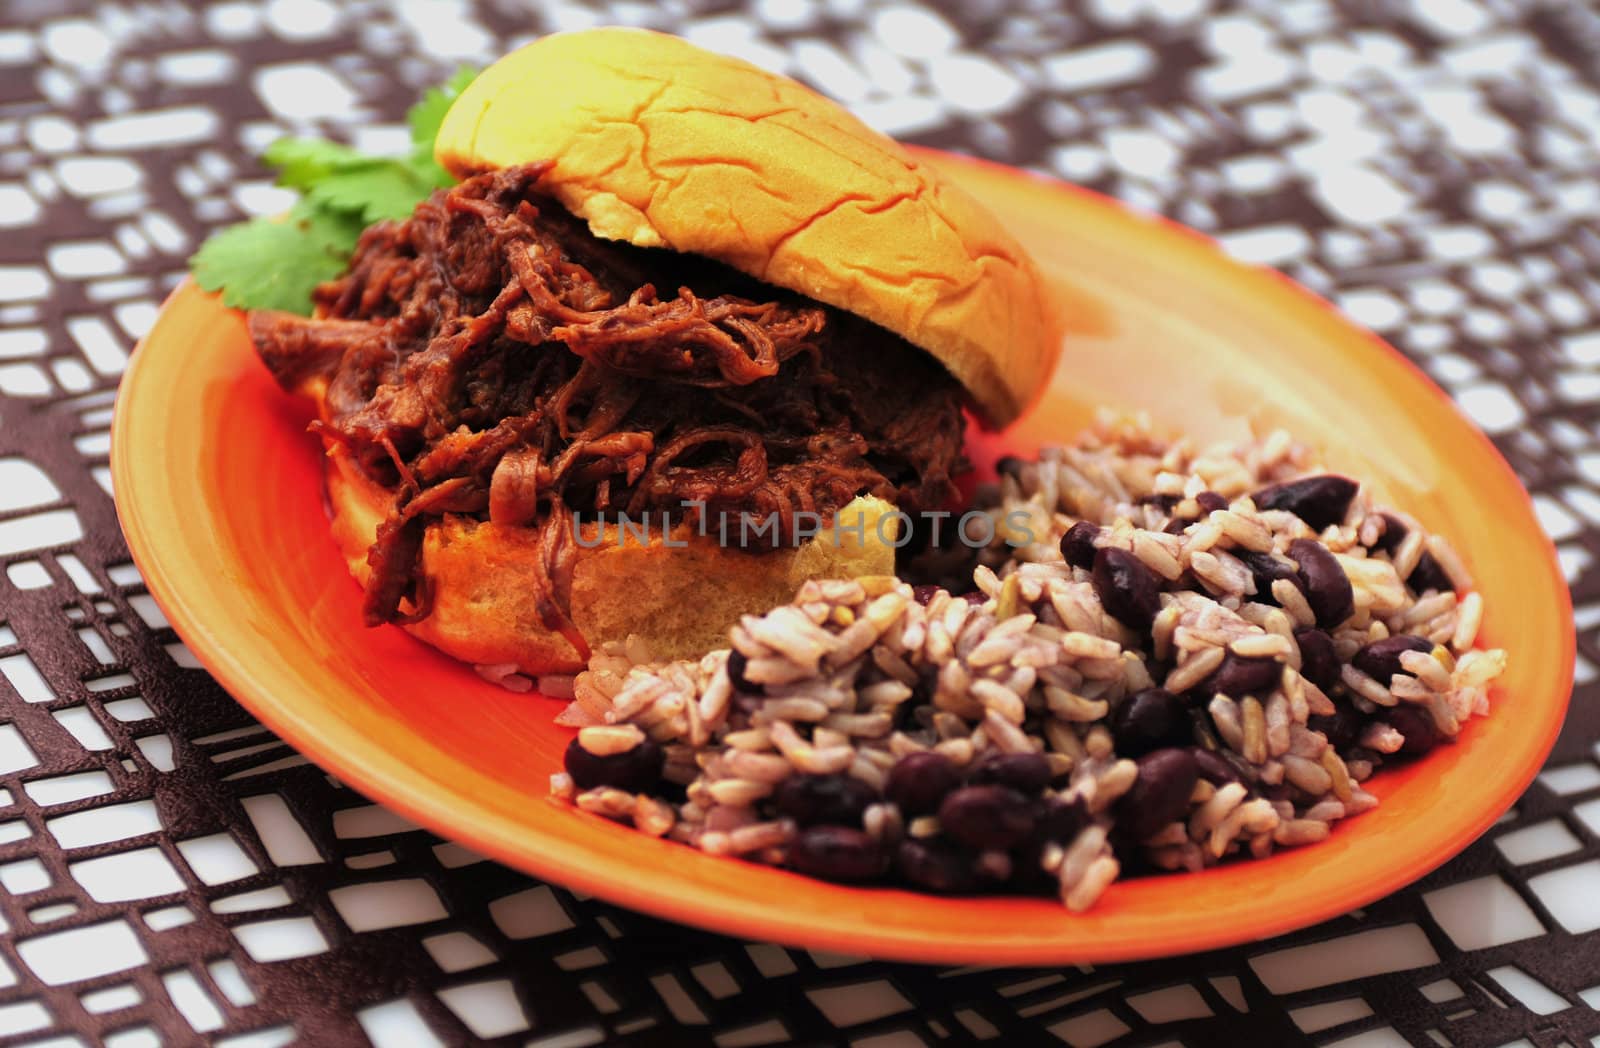 A shredded beef sandwich with beans and rice on a a geometric place mat